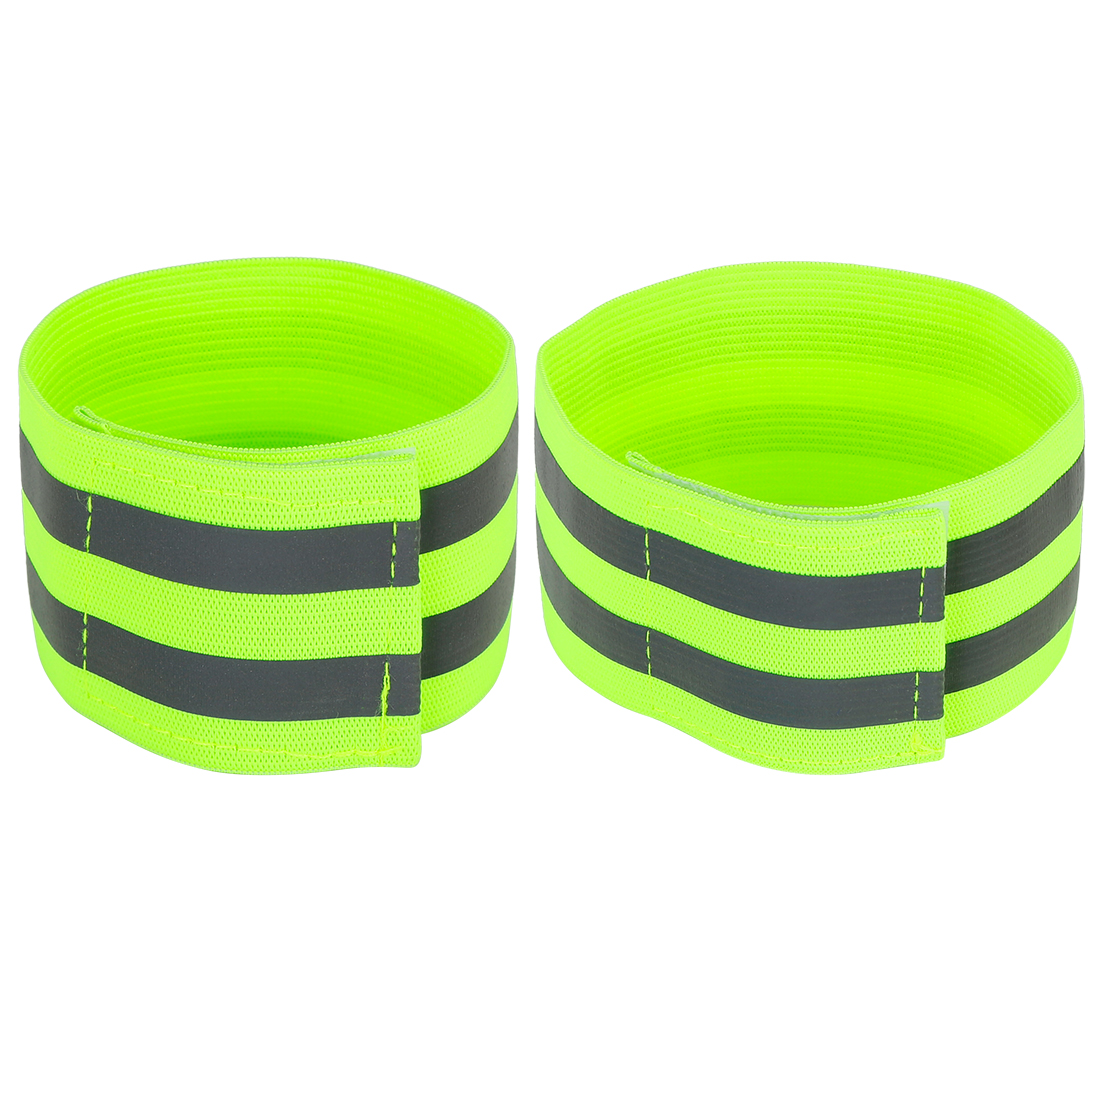 Unique Bargains 8pcs Reflective Bands for Wrist Ankle High Visibility Night Cycling Tape Green